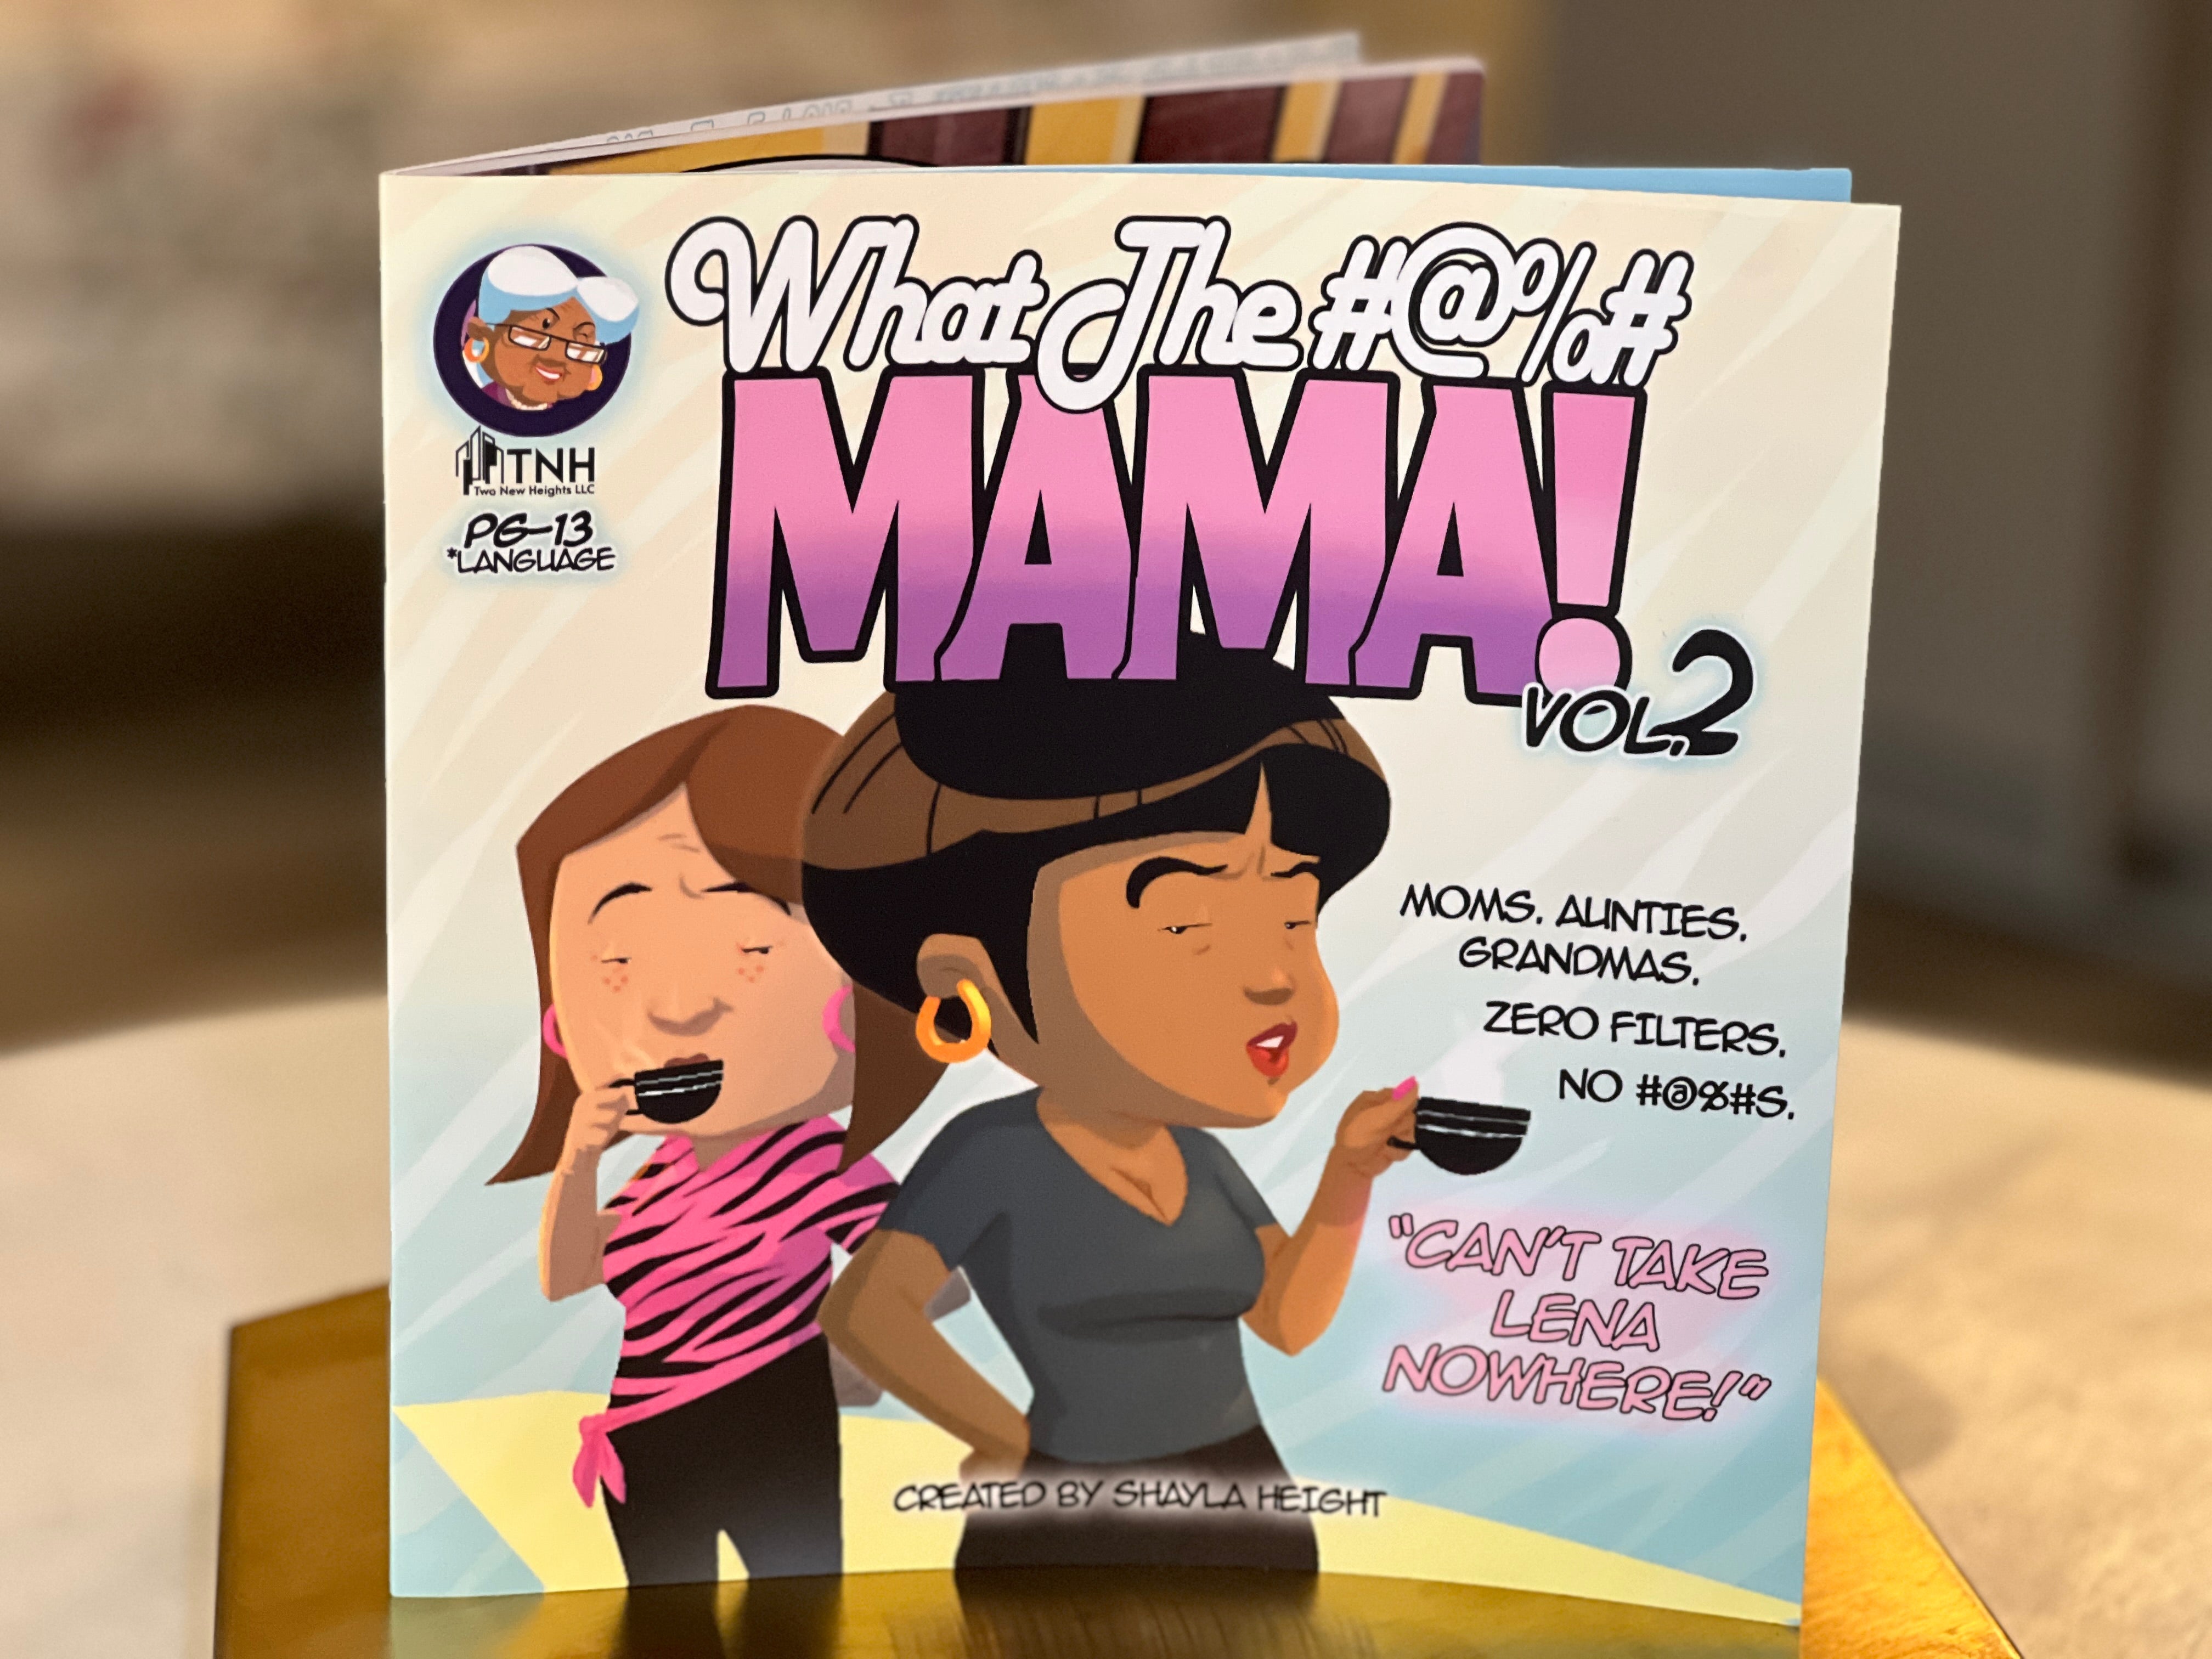 WTFMama #2 - Can't Take Lena Nowhere!